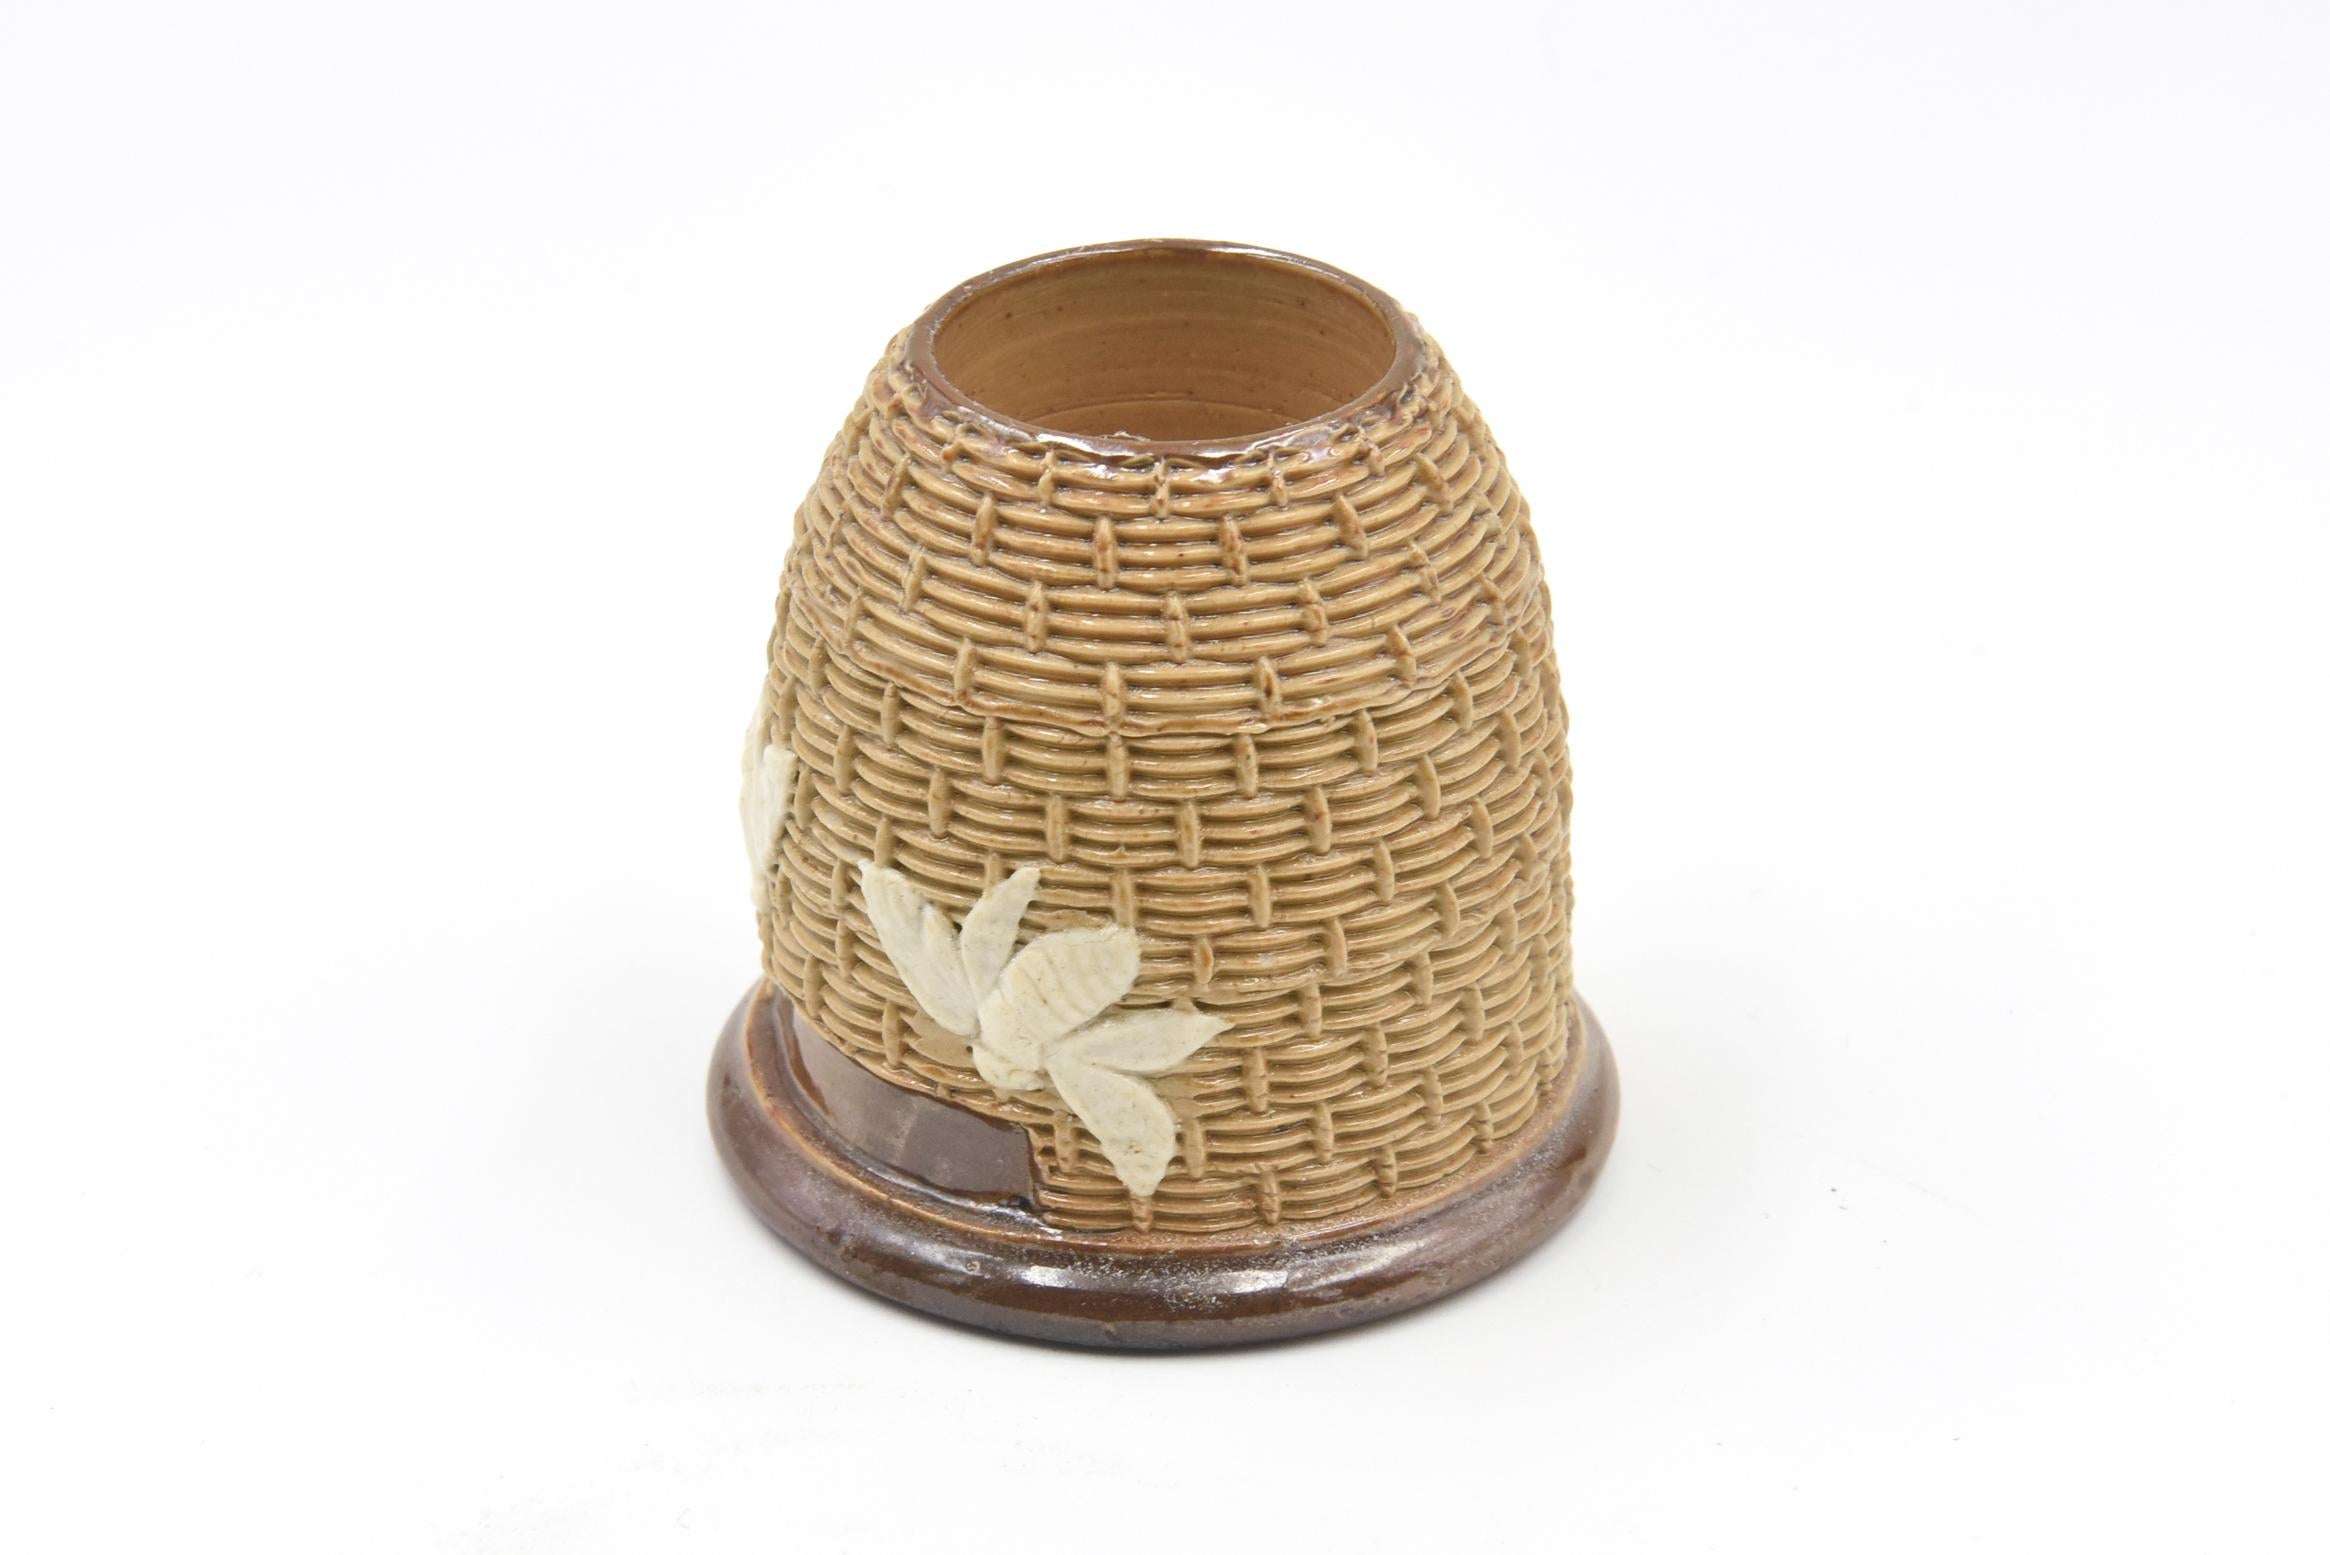 Impressed basketweave design, with applied relief bumblebees. 
Featured in 